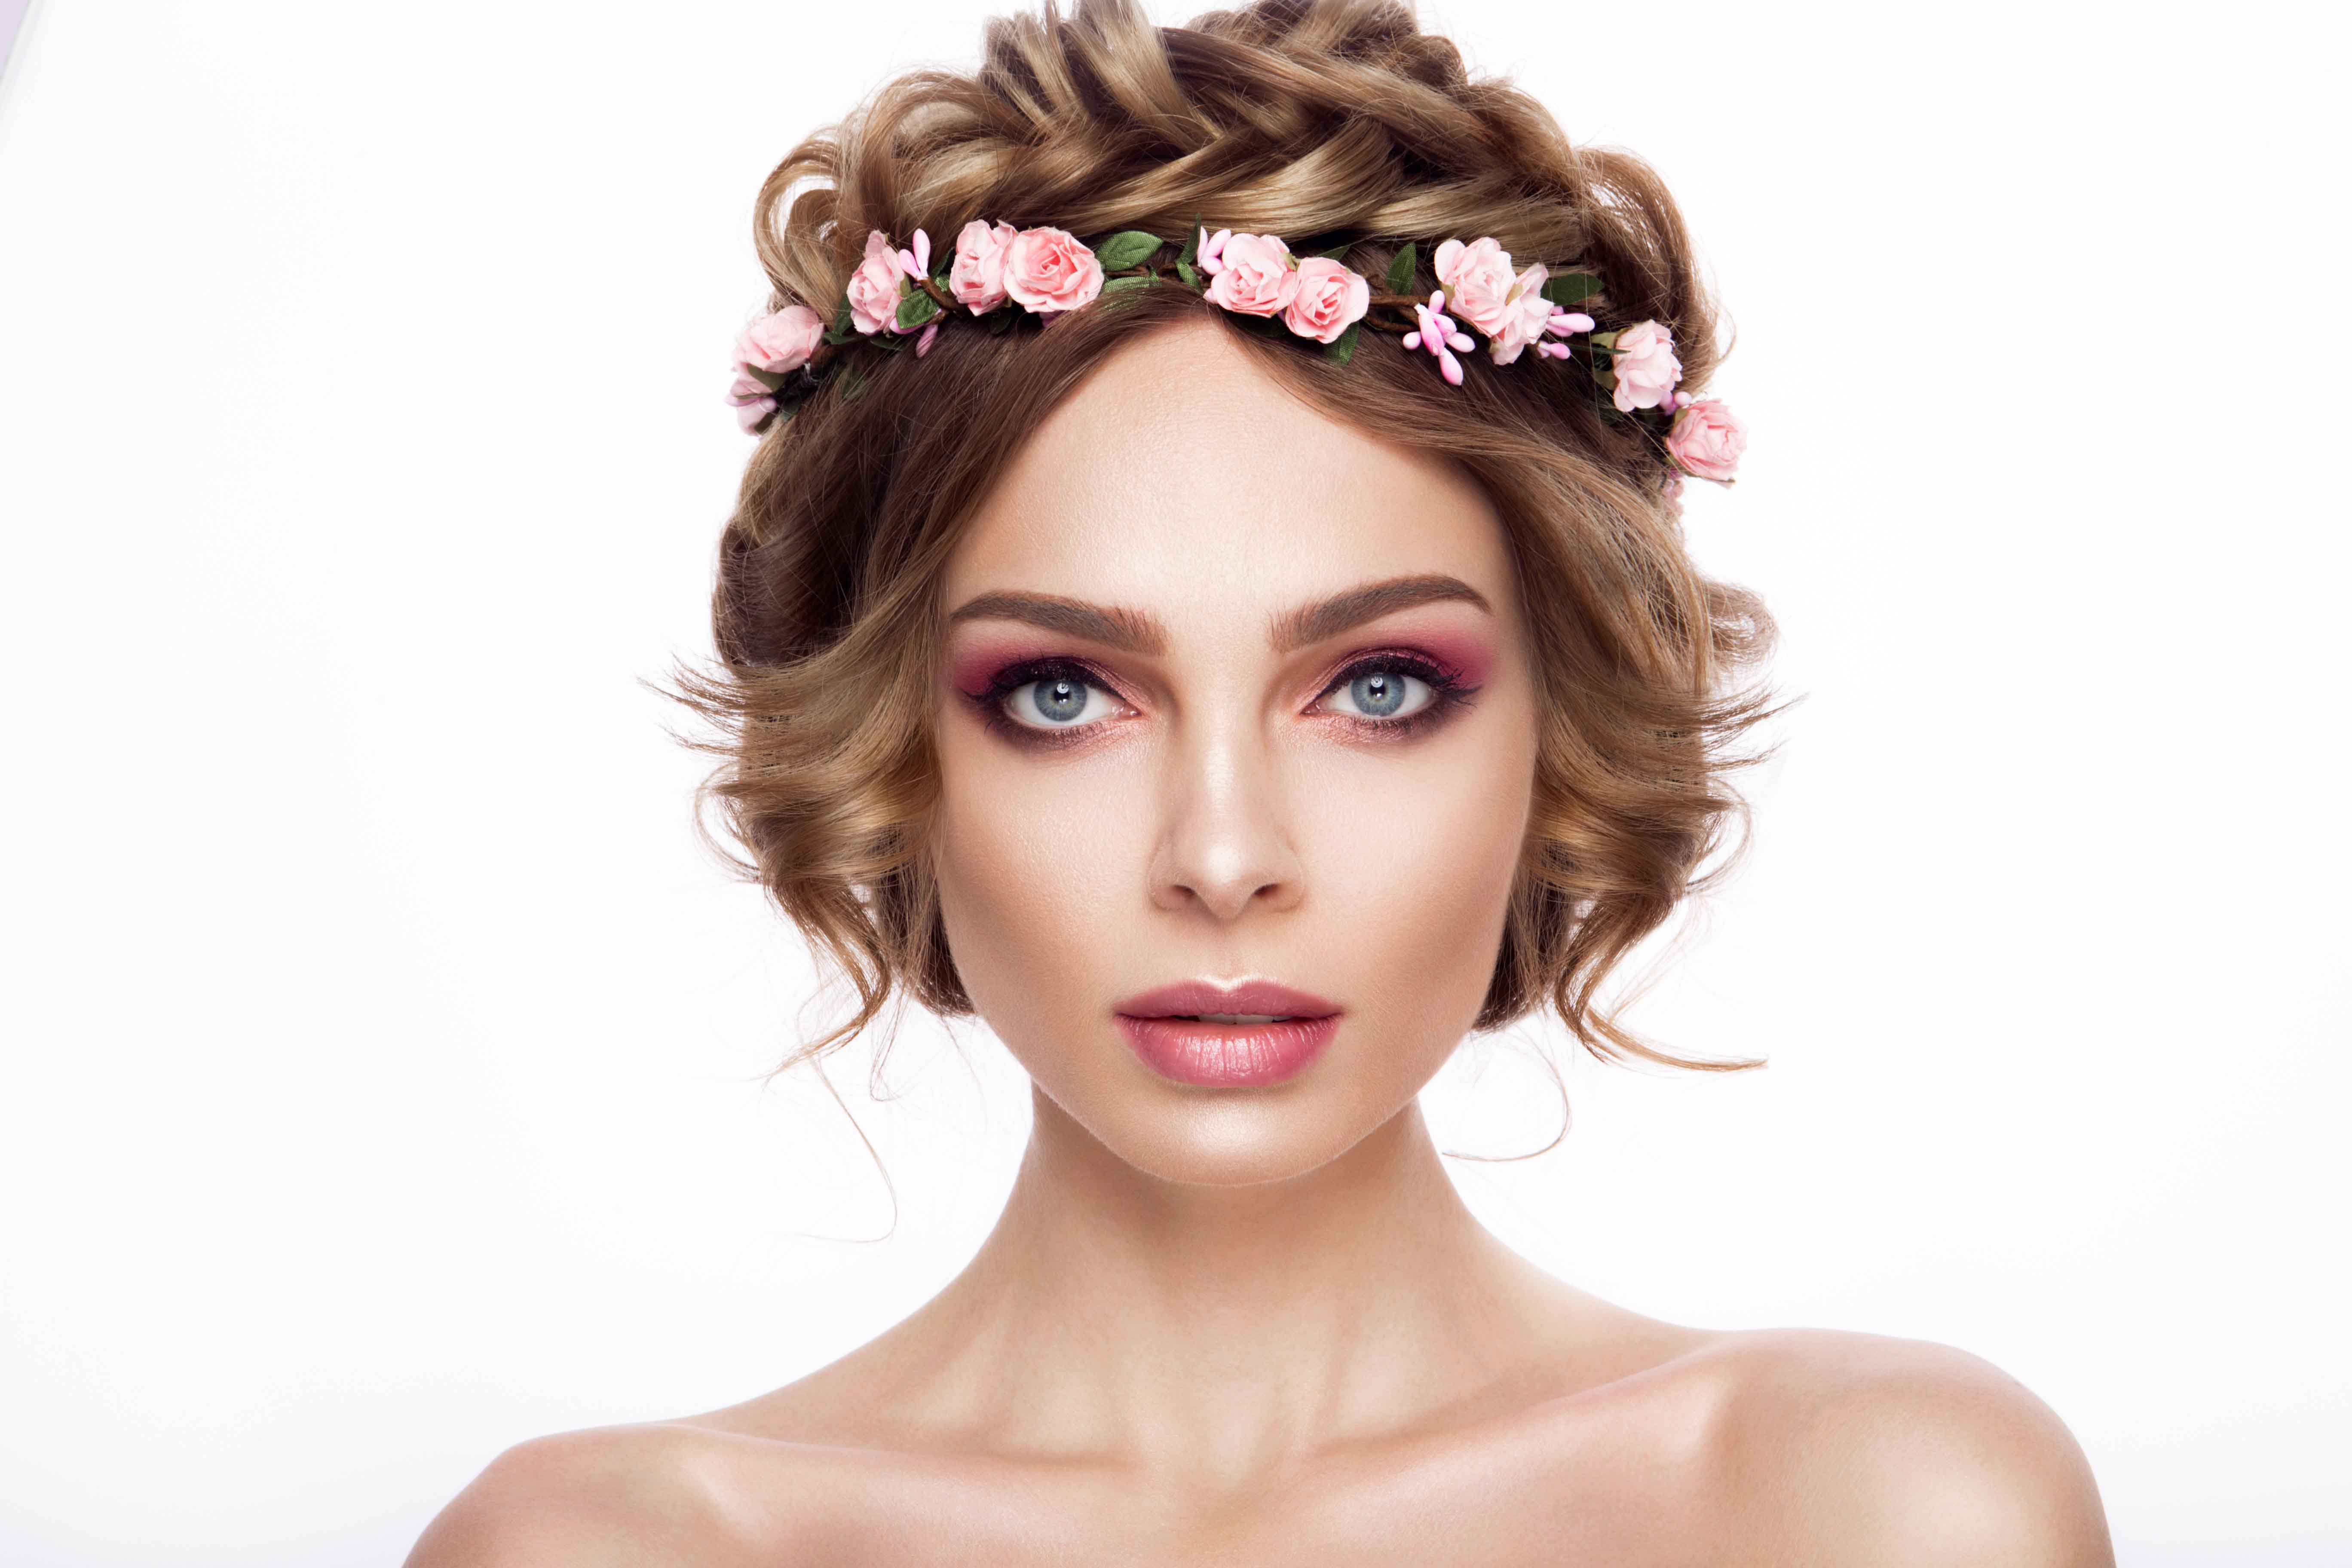 Fashion Beauty Model Girl with Flowers Hair. Bride. Perfect Creative Make up and Hair Style. Hairstyle. Beautiful Flowers